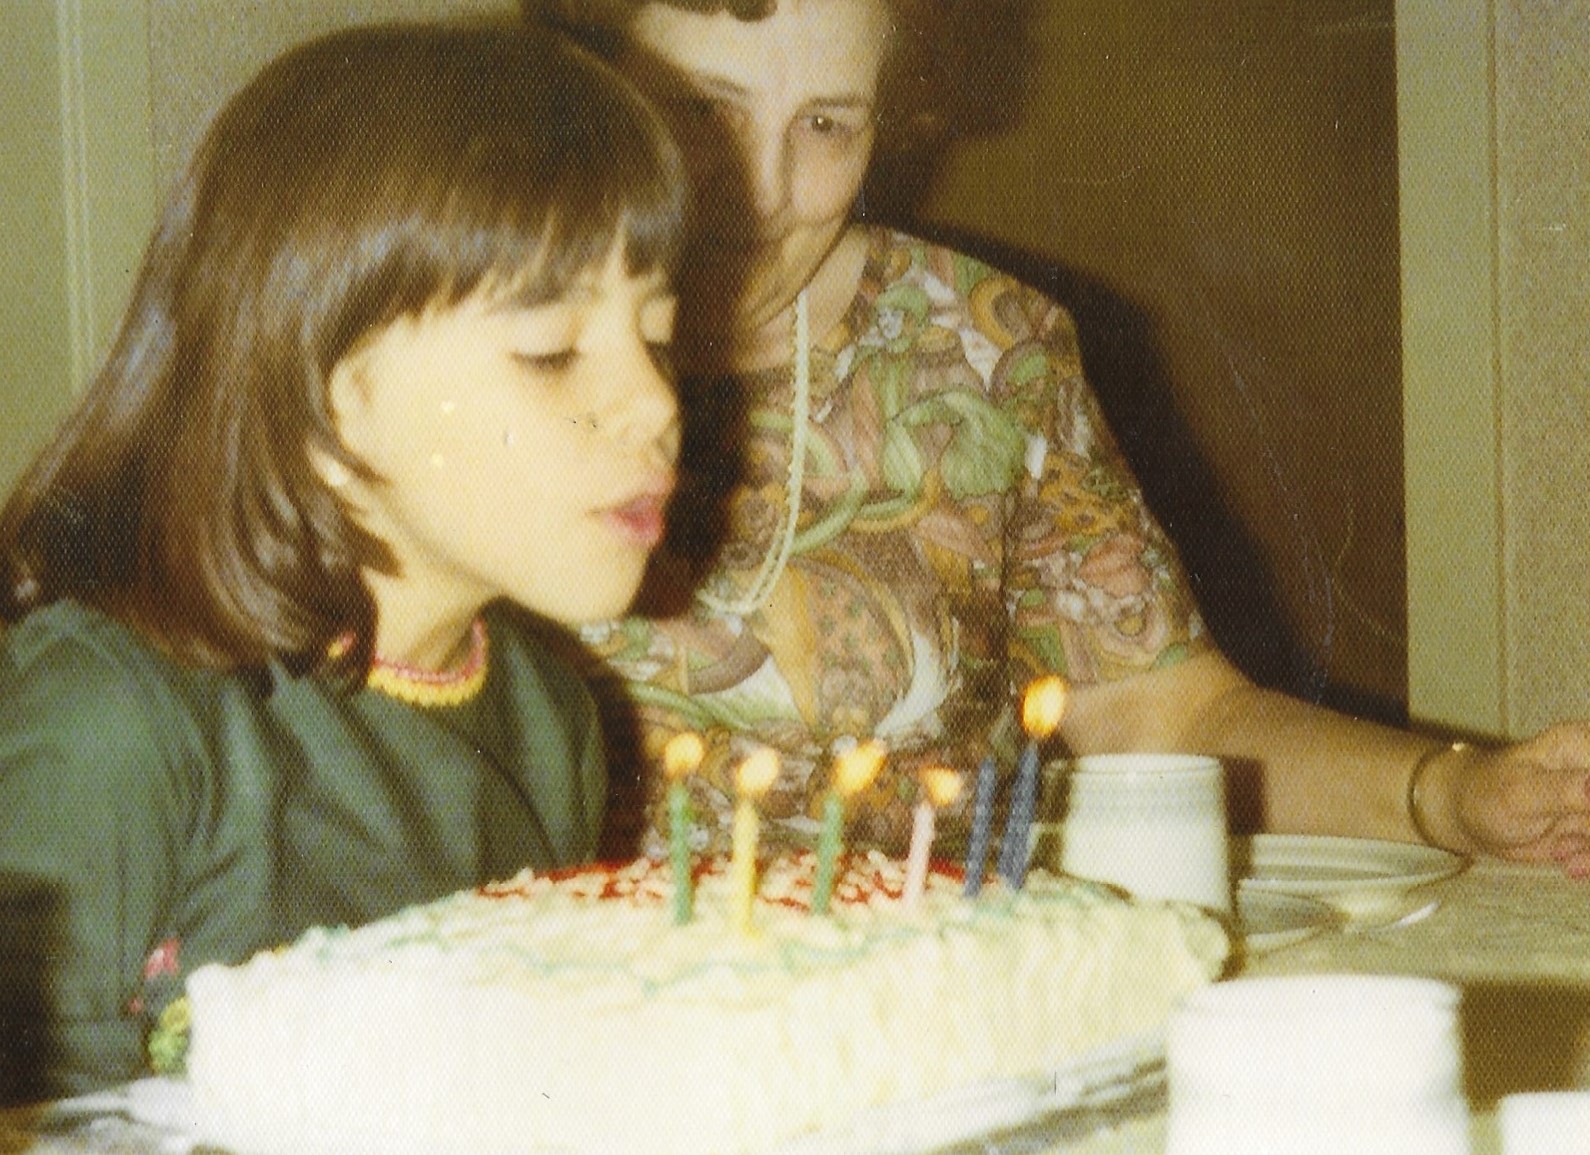 Child blowing out candles on a cake.